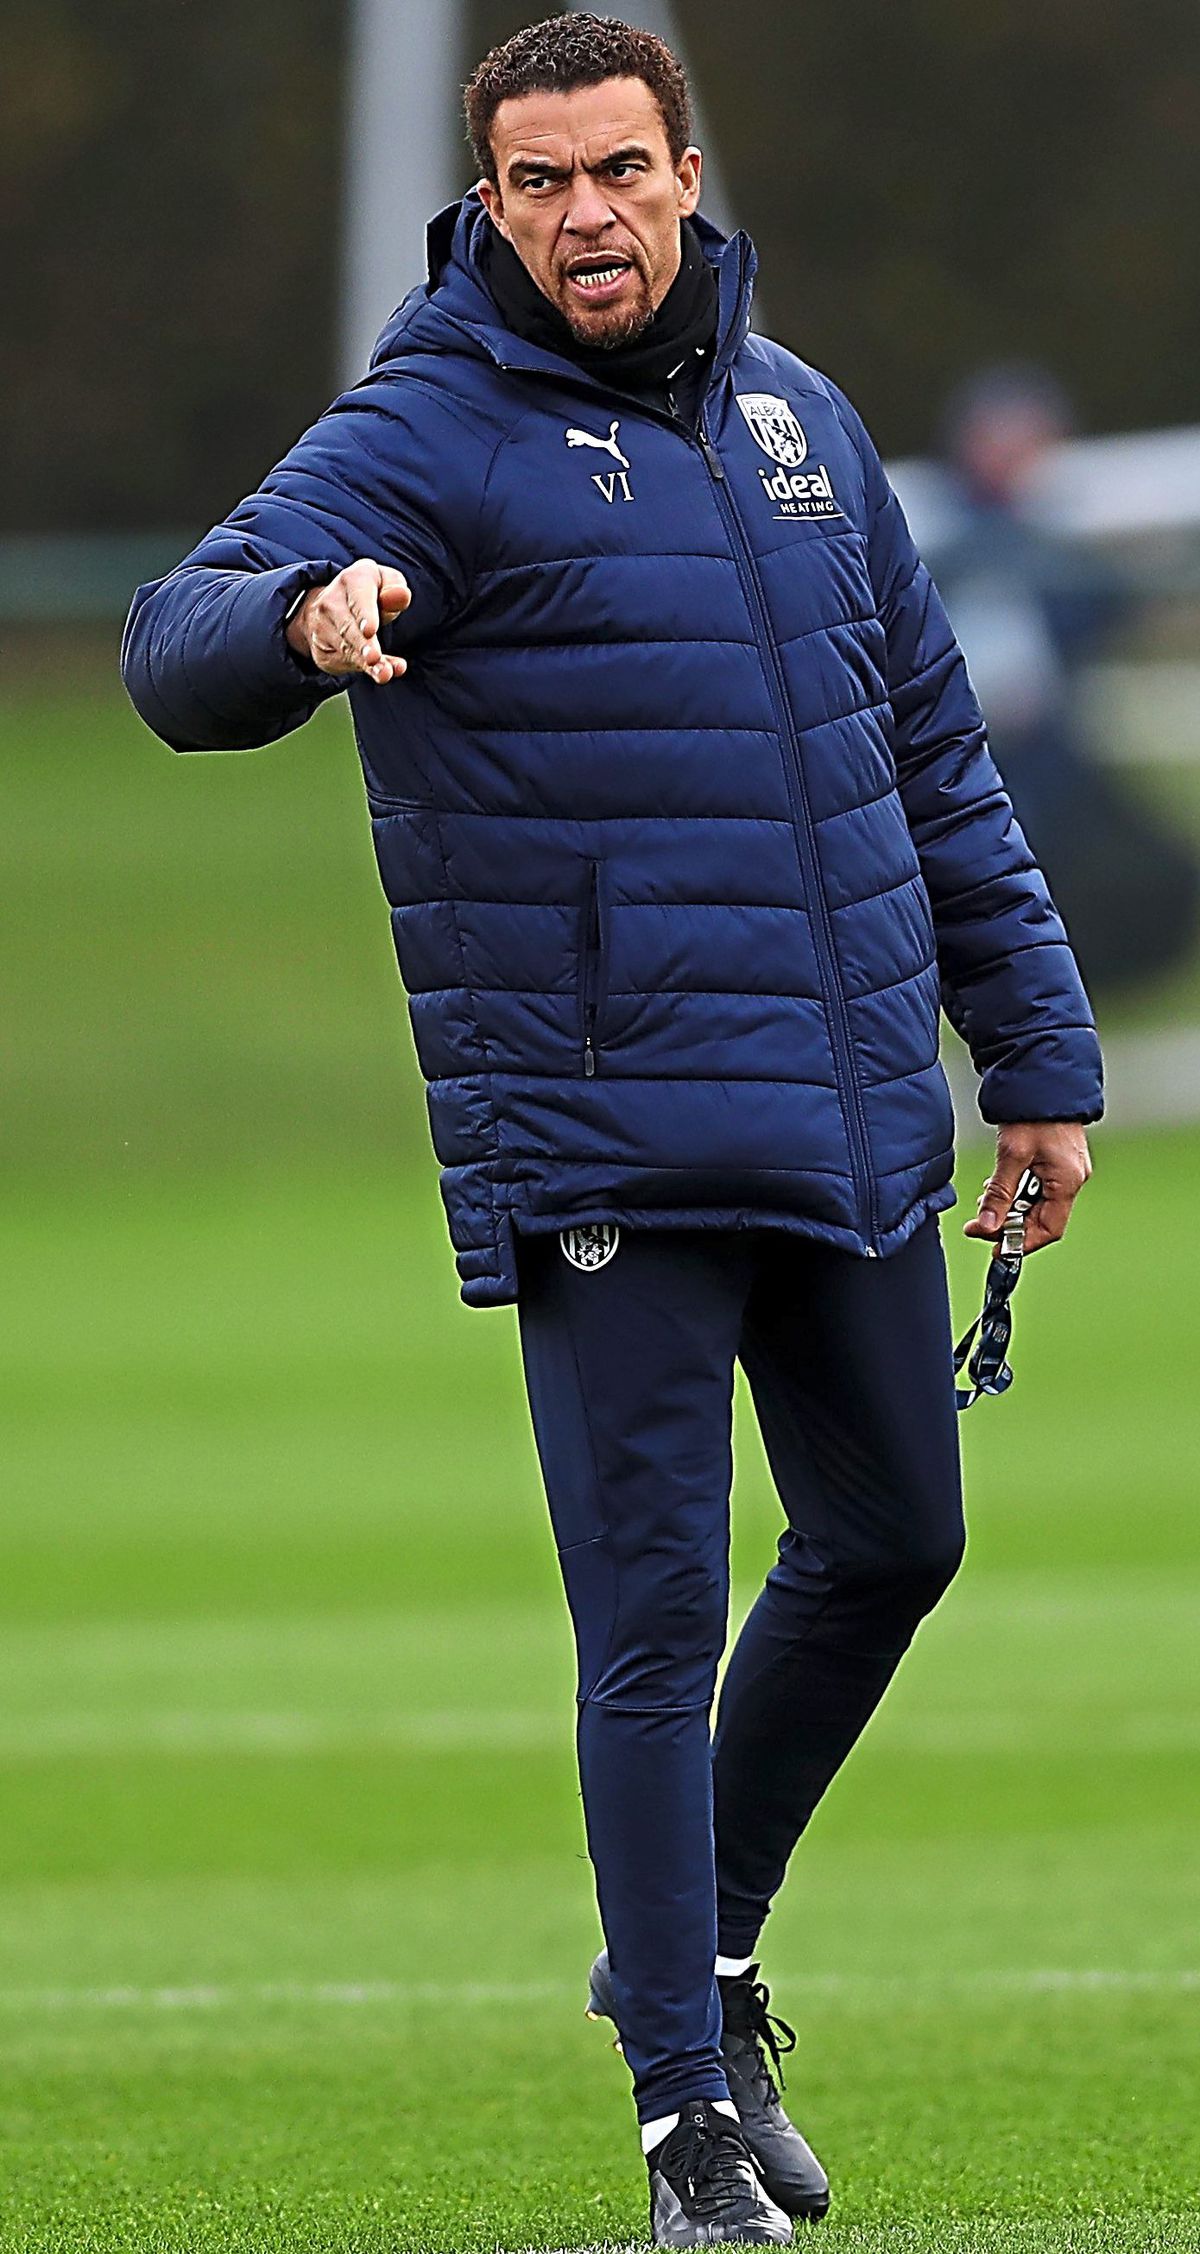 WALSALL, ENGLAND - DECEMBER 15: Valerien Ismael Head Coach / Manager of West Bromwich Albion at West Bromwich Albion Training Ground on December 15, 2021 in Walsall, England. (Photo by Adam Fradgley/West Bromwich Albion FC via Getty Images).